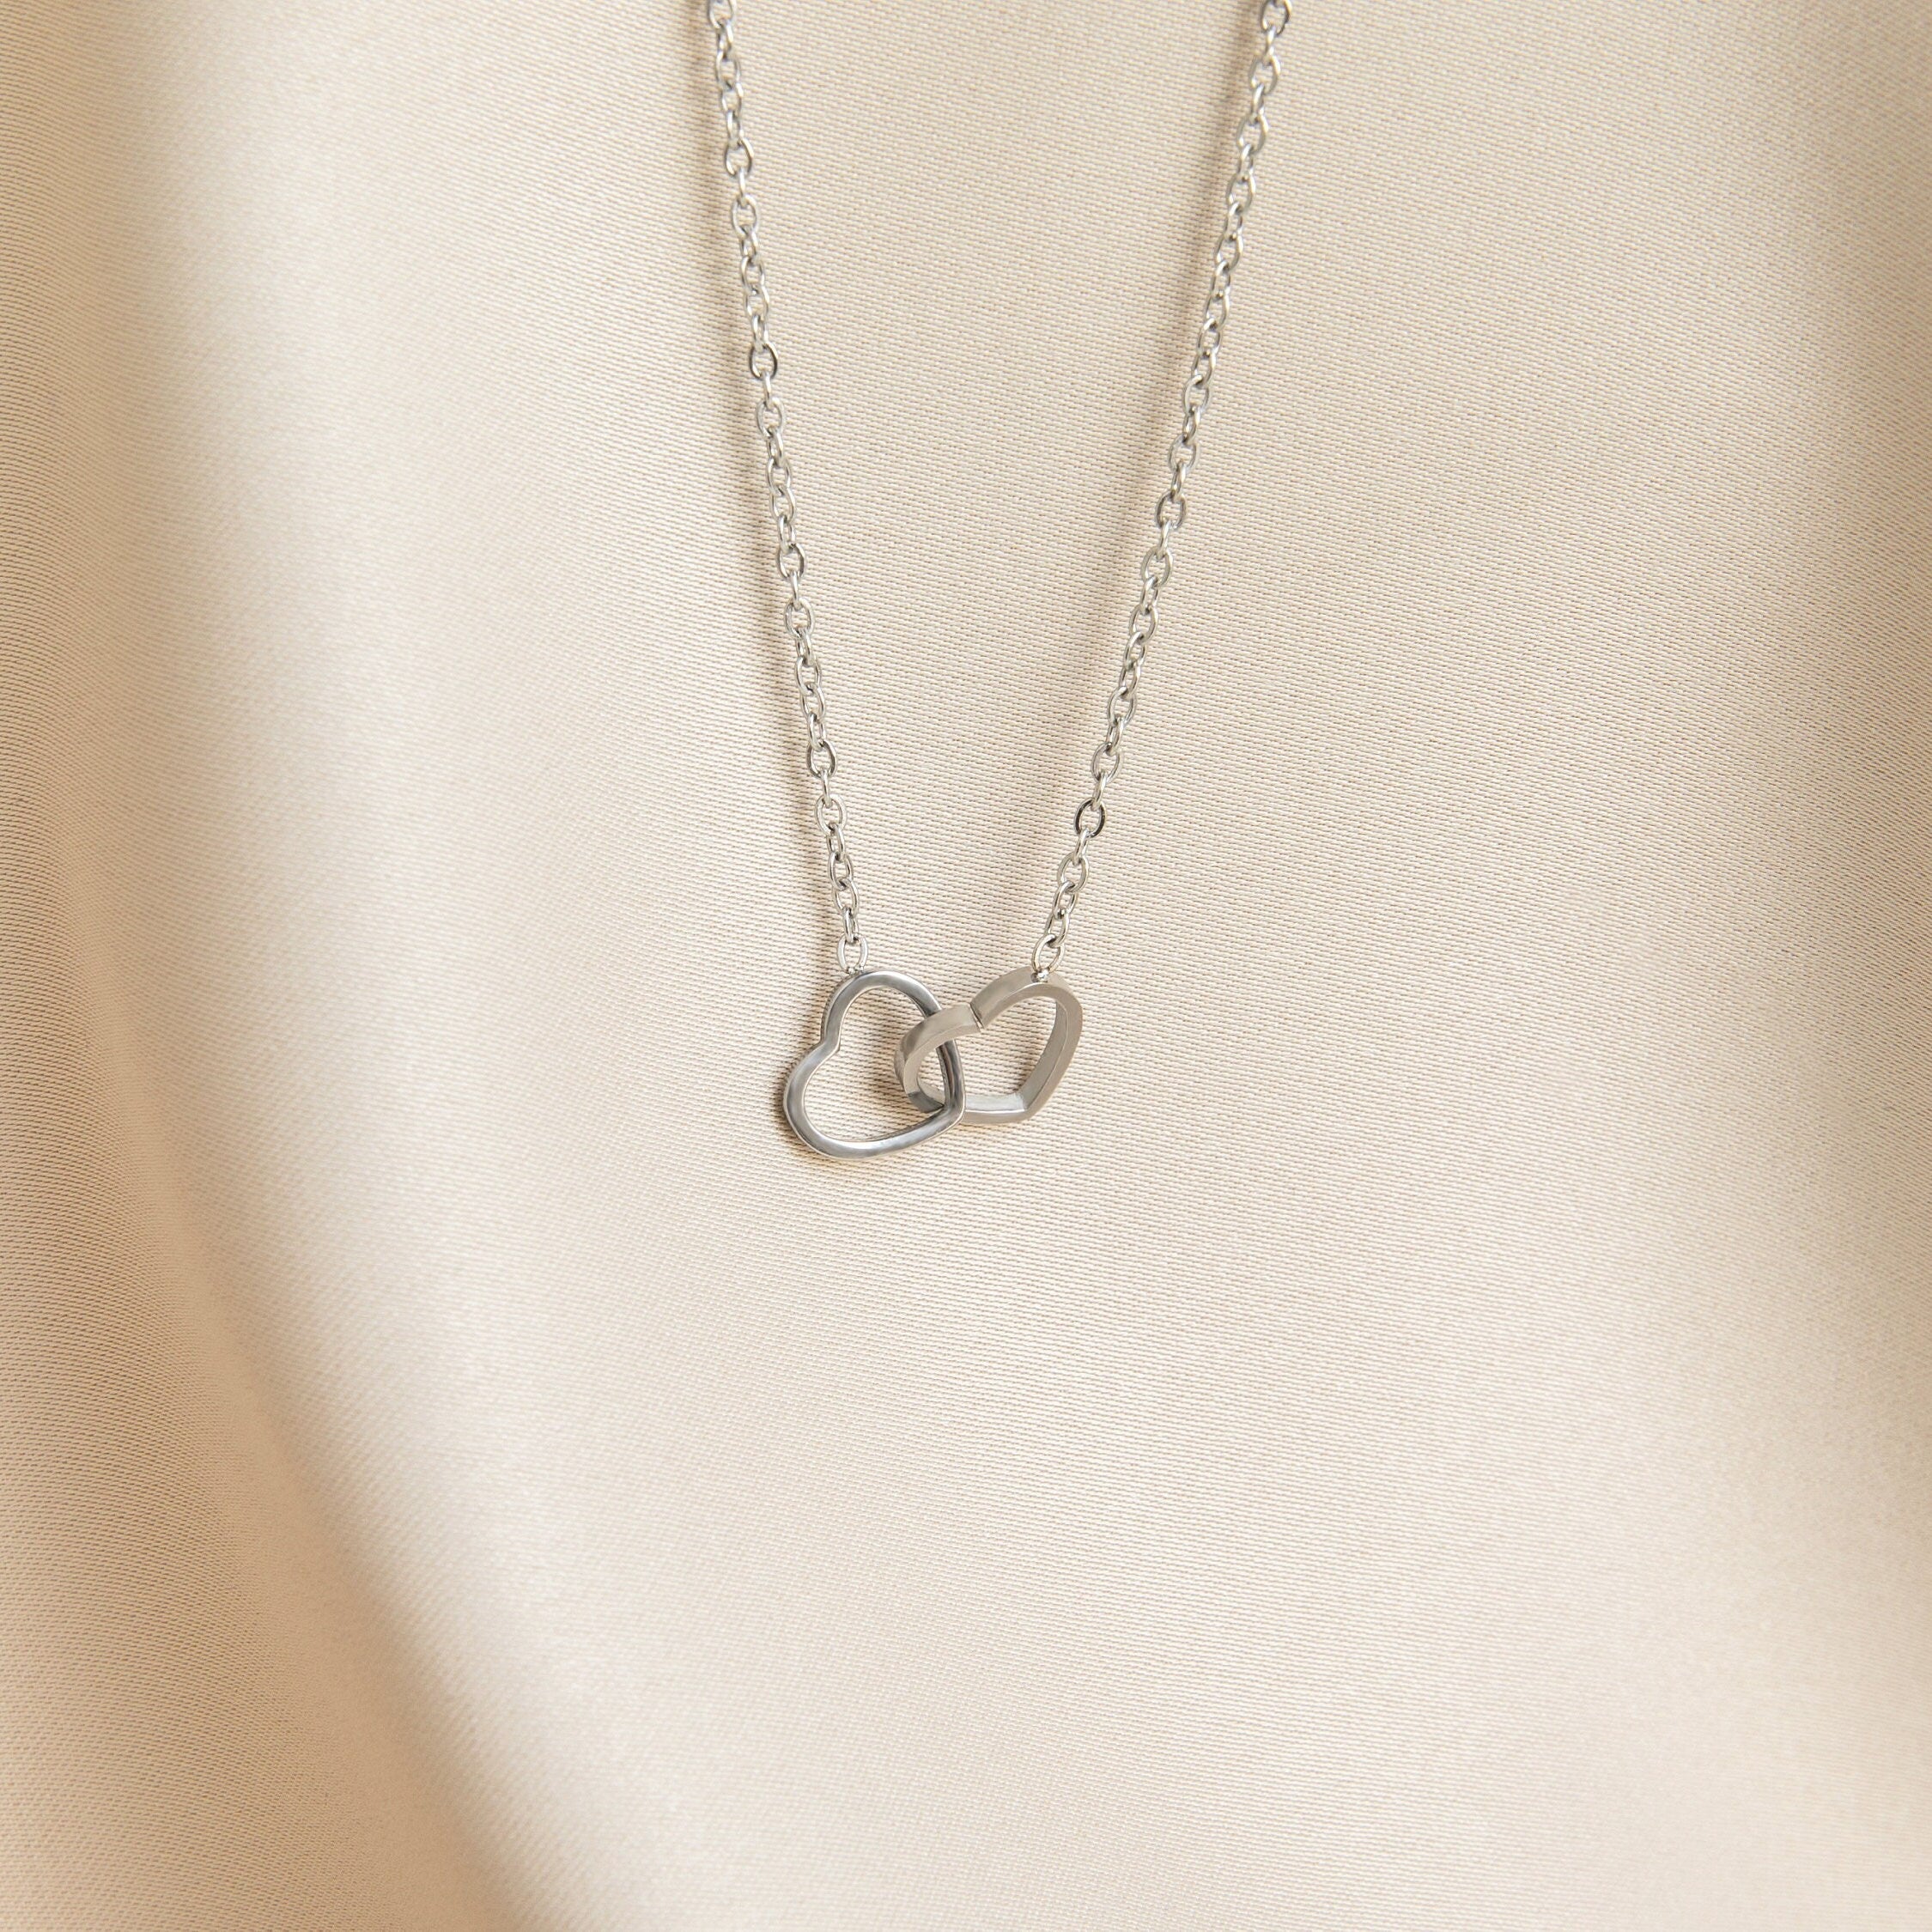 Double Heart Pendant Necklace - Marlee Janes